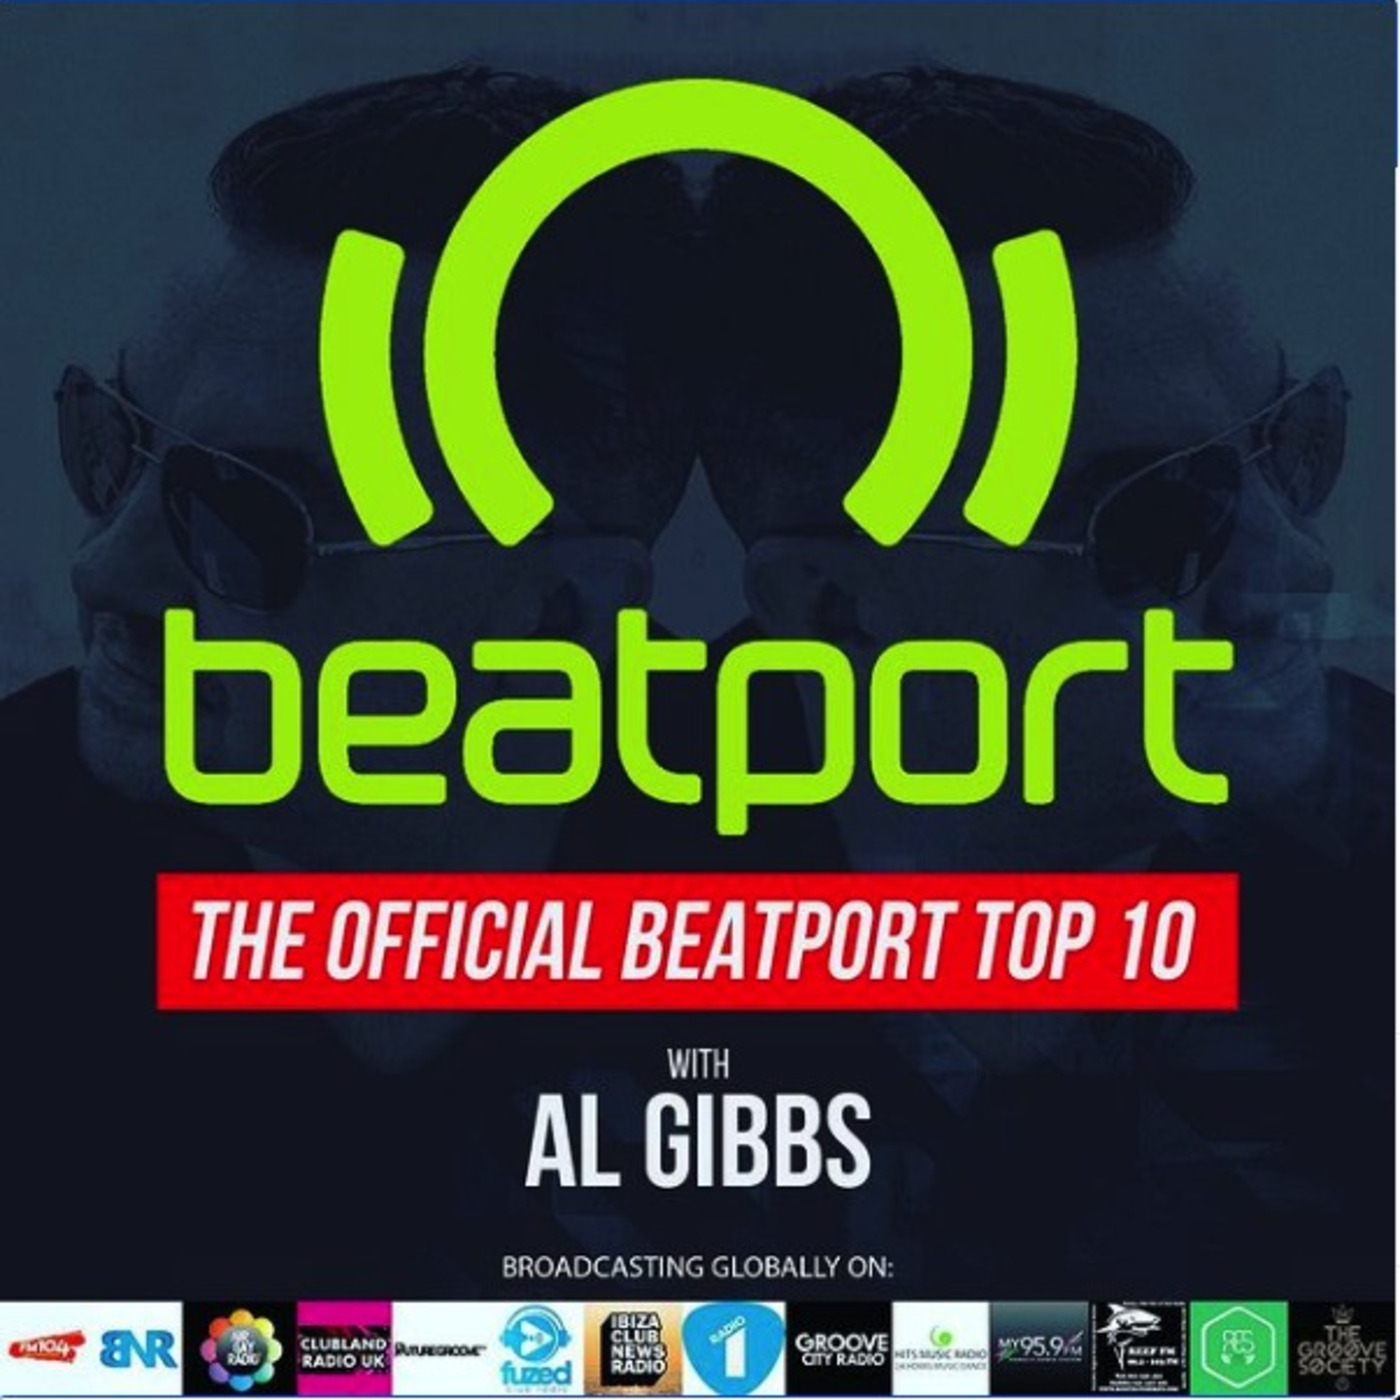 Episode 54: THE OFFICIAL BEATPORT TOP 10 WITH AL GIBBS (WEEK 2 2021)